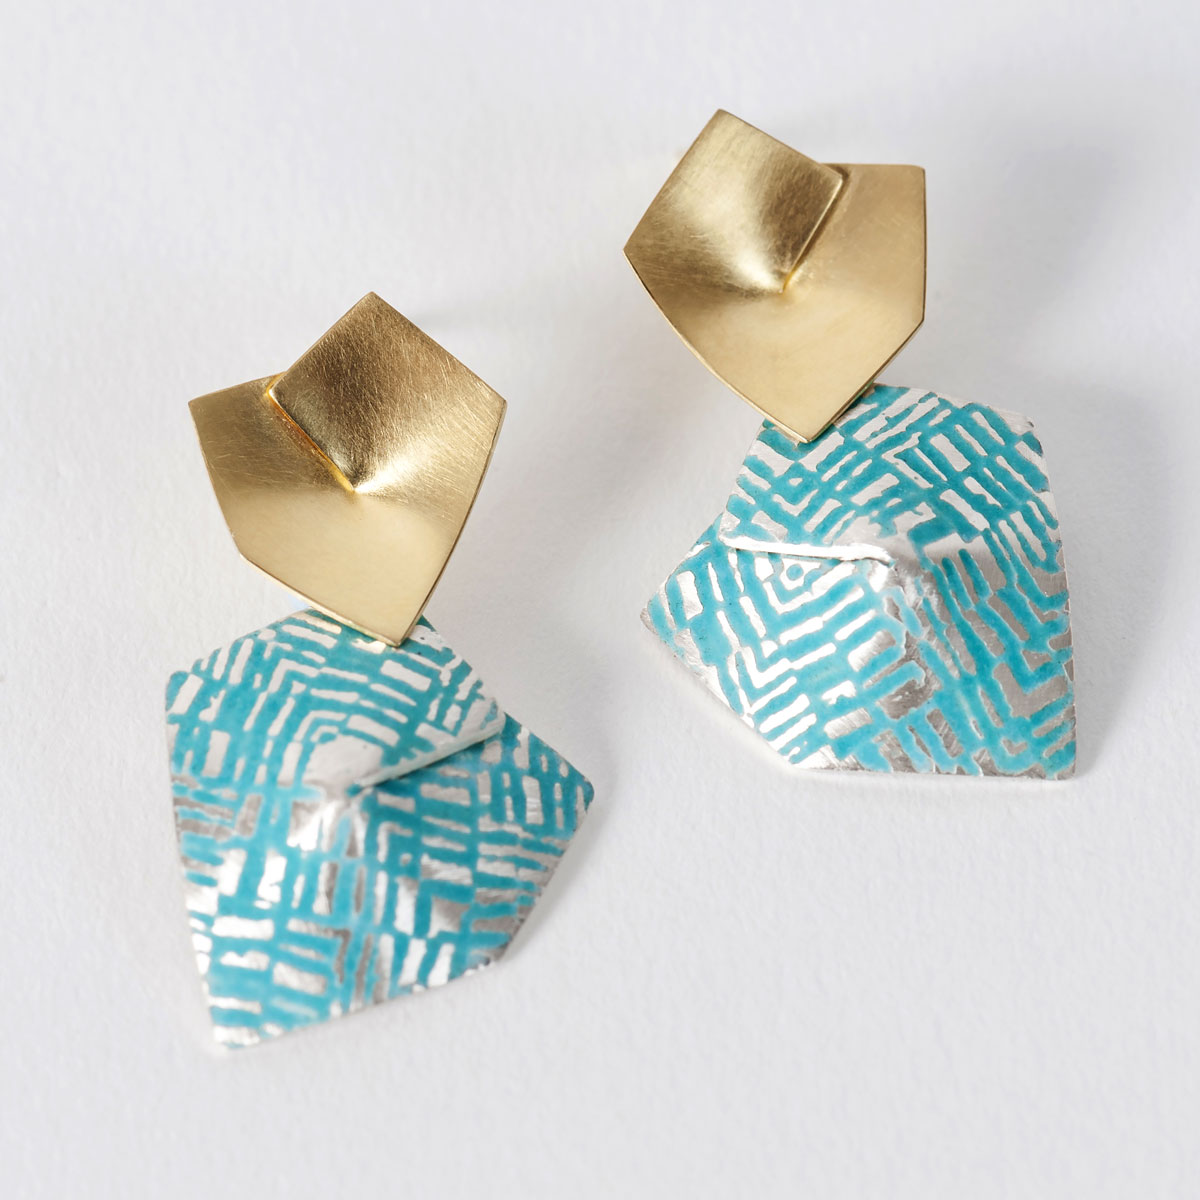 'Weave' Gold and Turquoise Drop Earrings